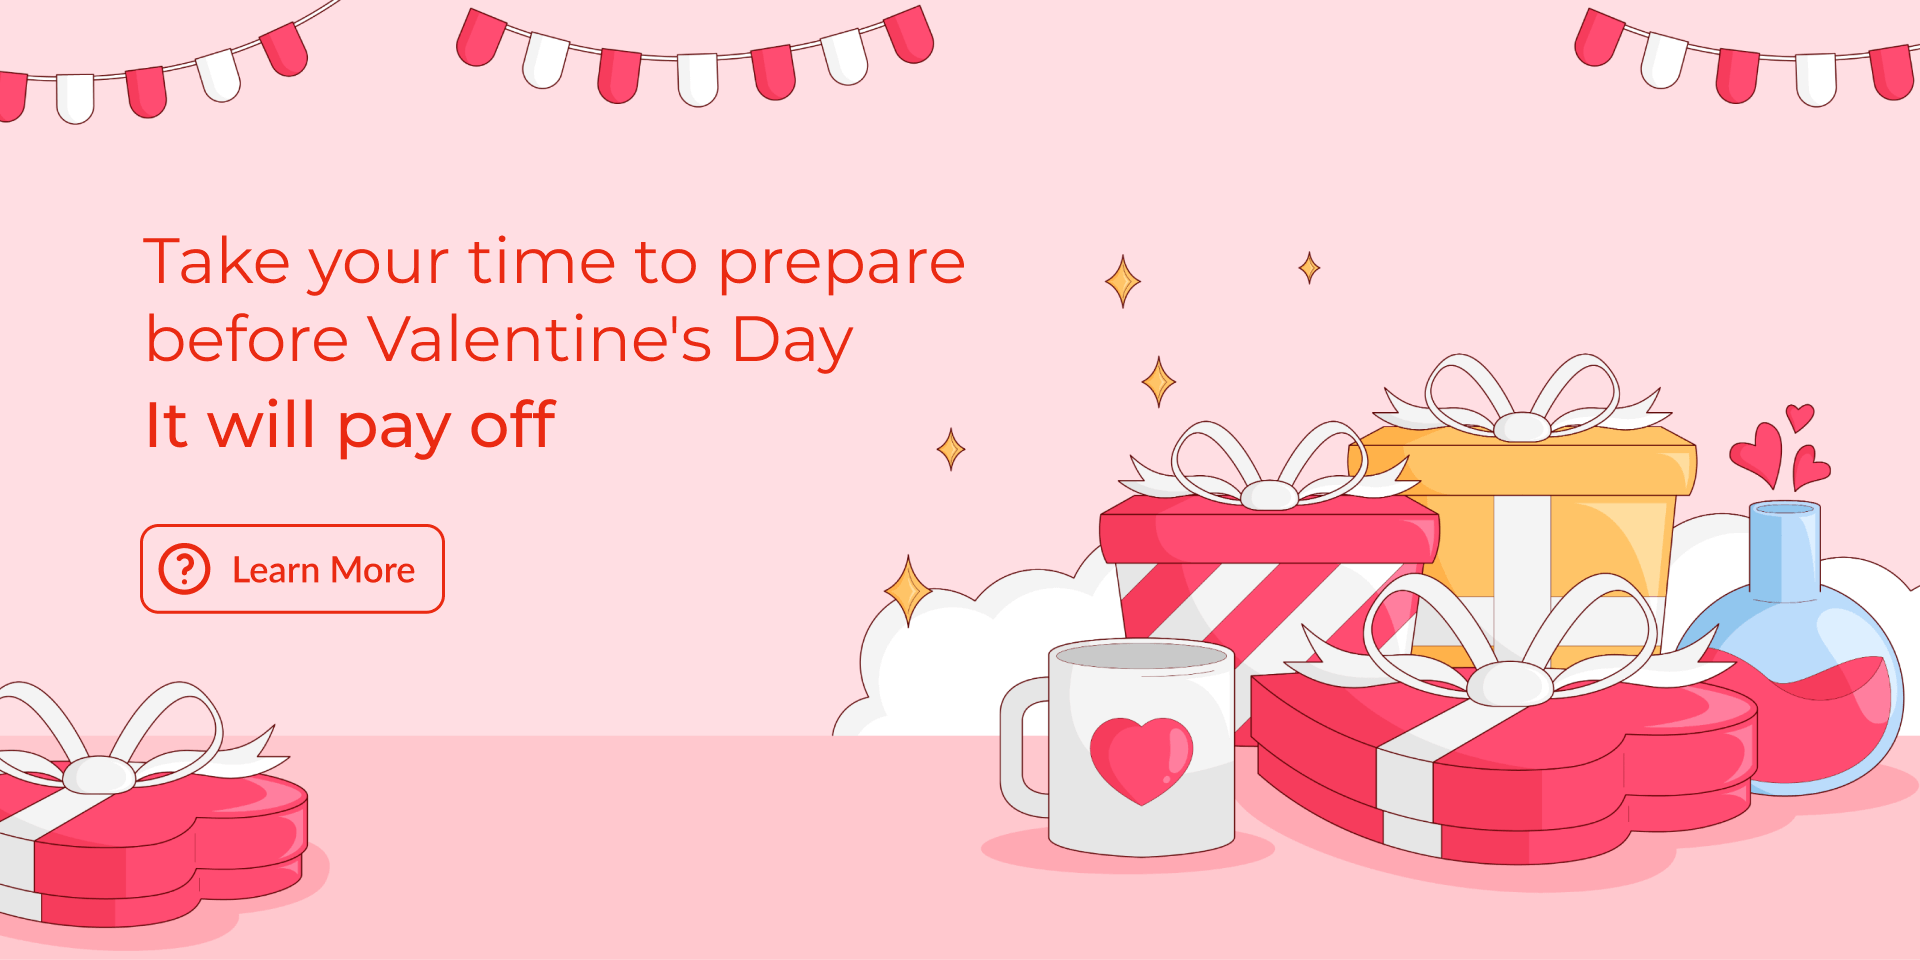 Take Your Time to Prepare Before Valentine's Day - It Will Pay Off